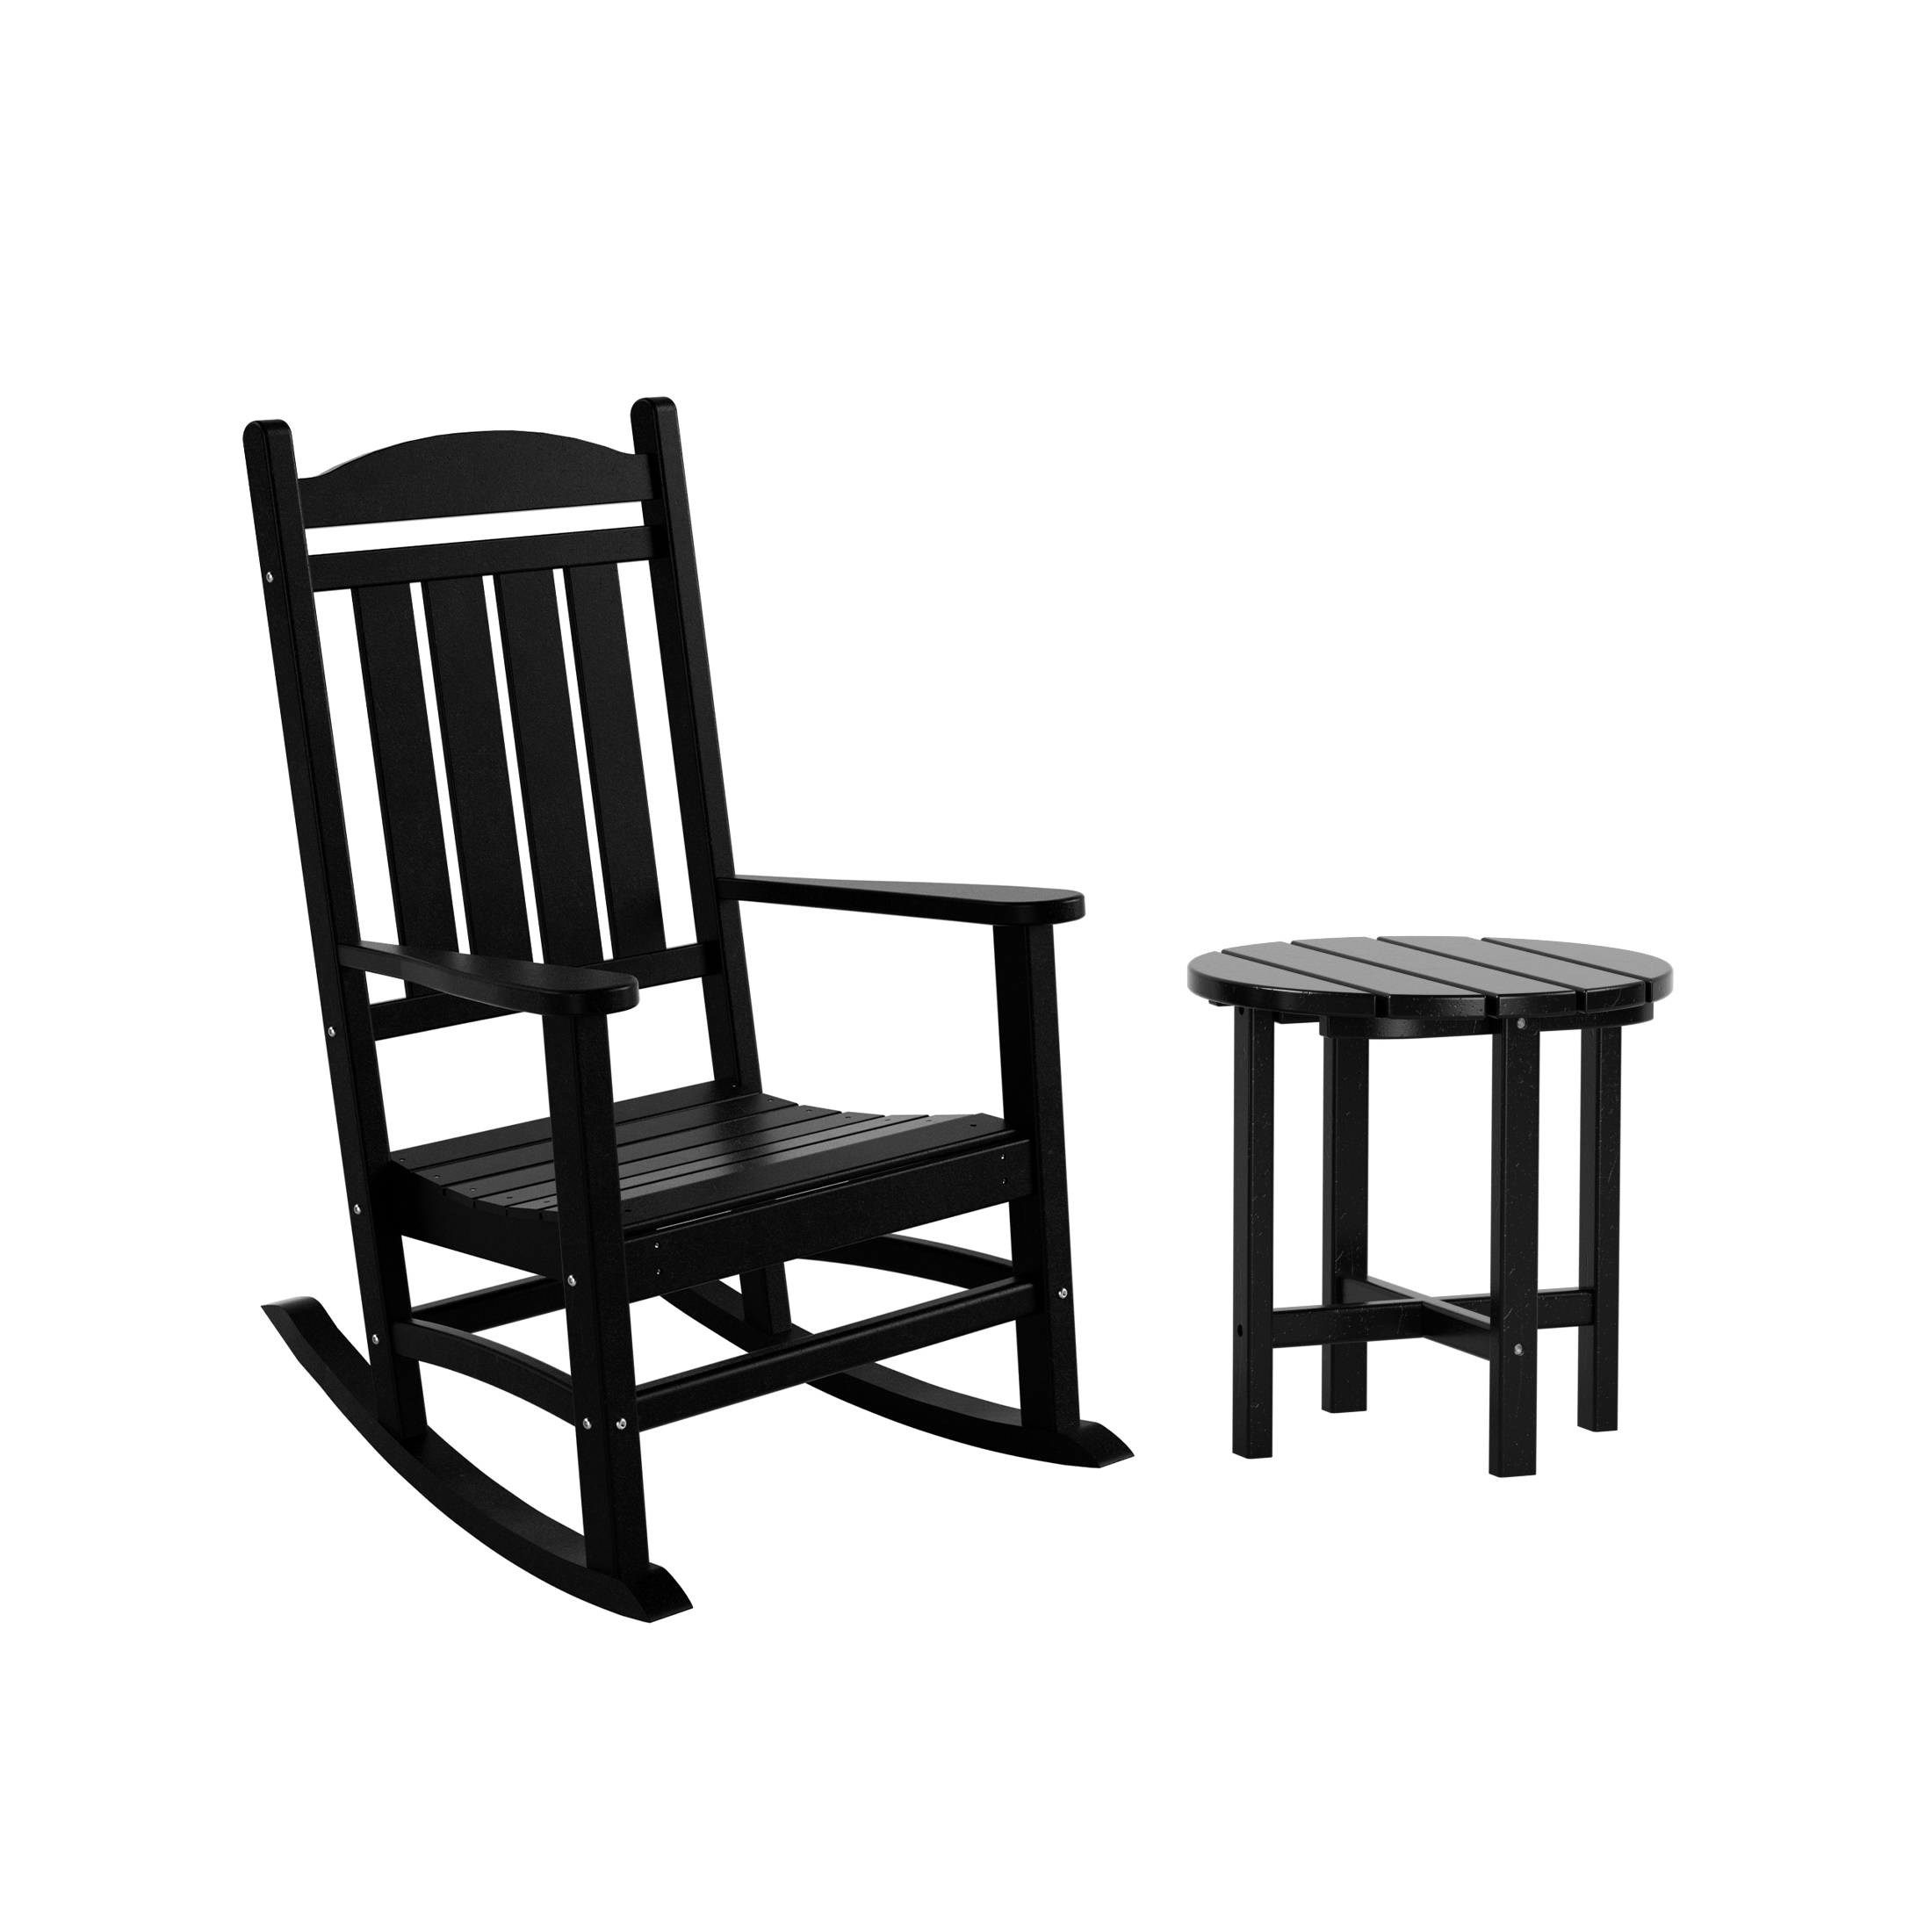 GARDEN 2-Piece Set Classic Plastic Porch Rocking Chair with Round Side Table Included, Black - image 2 of 7